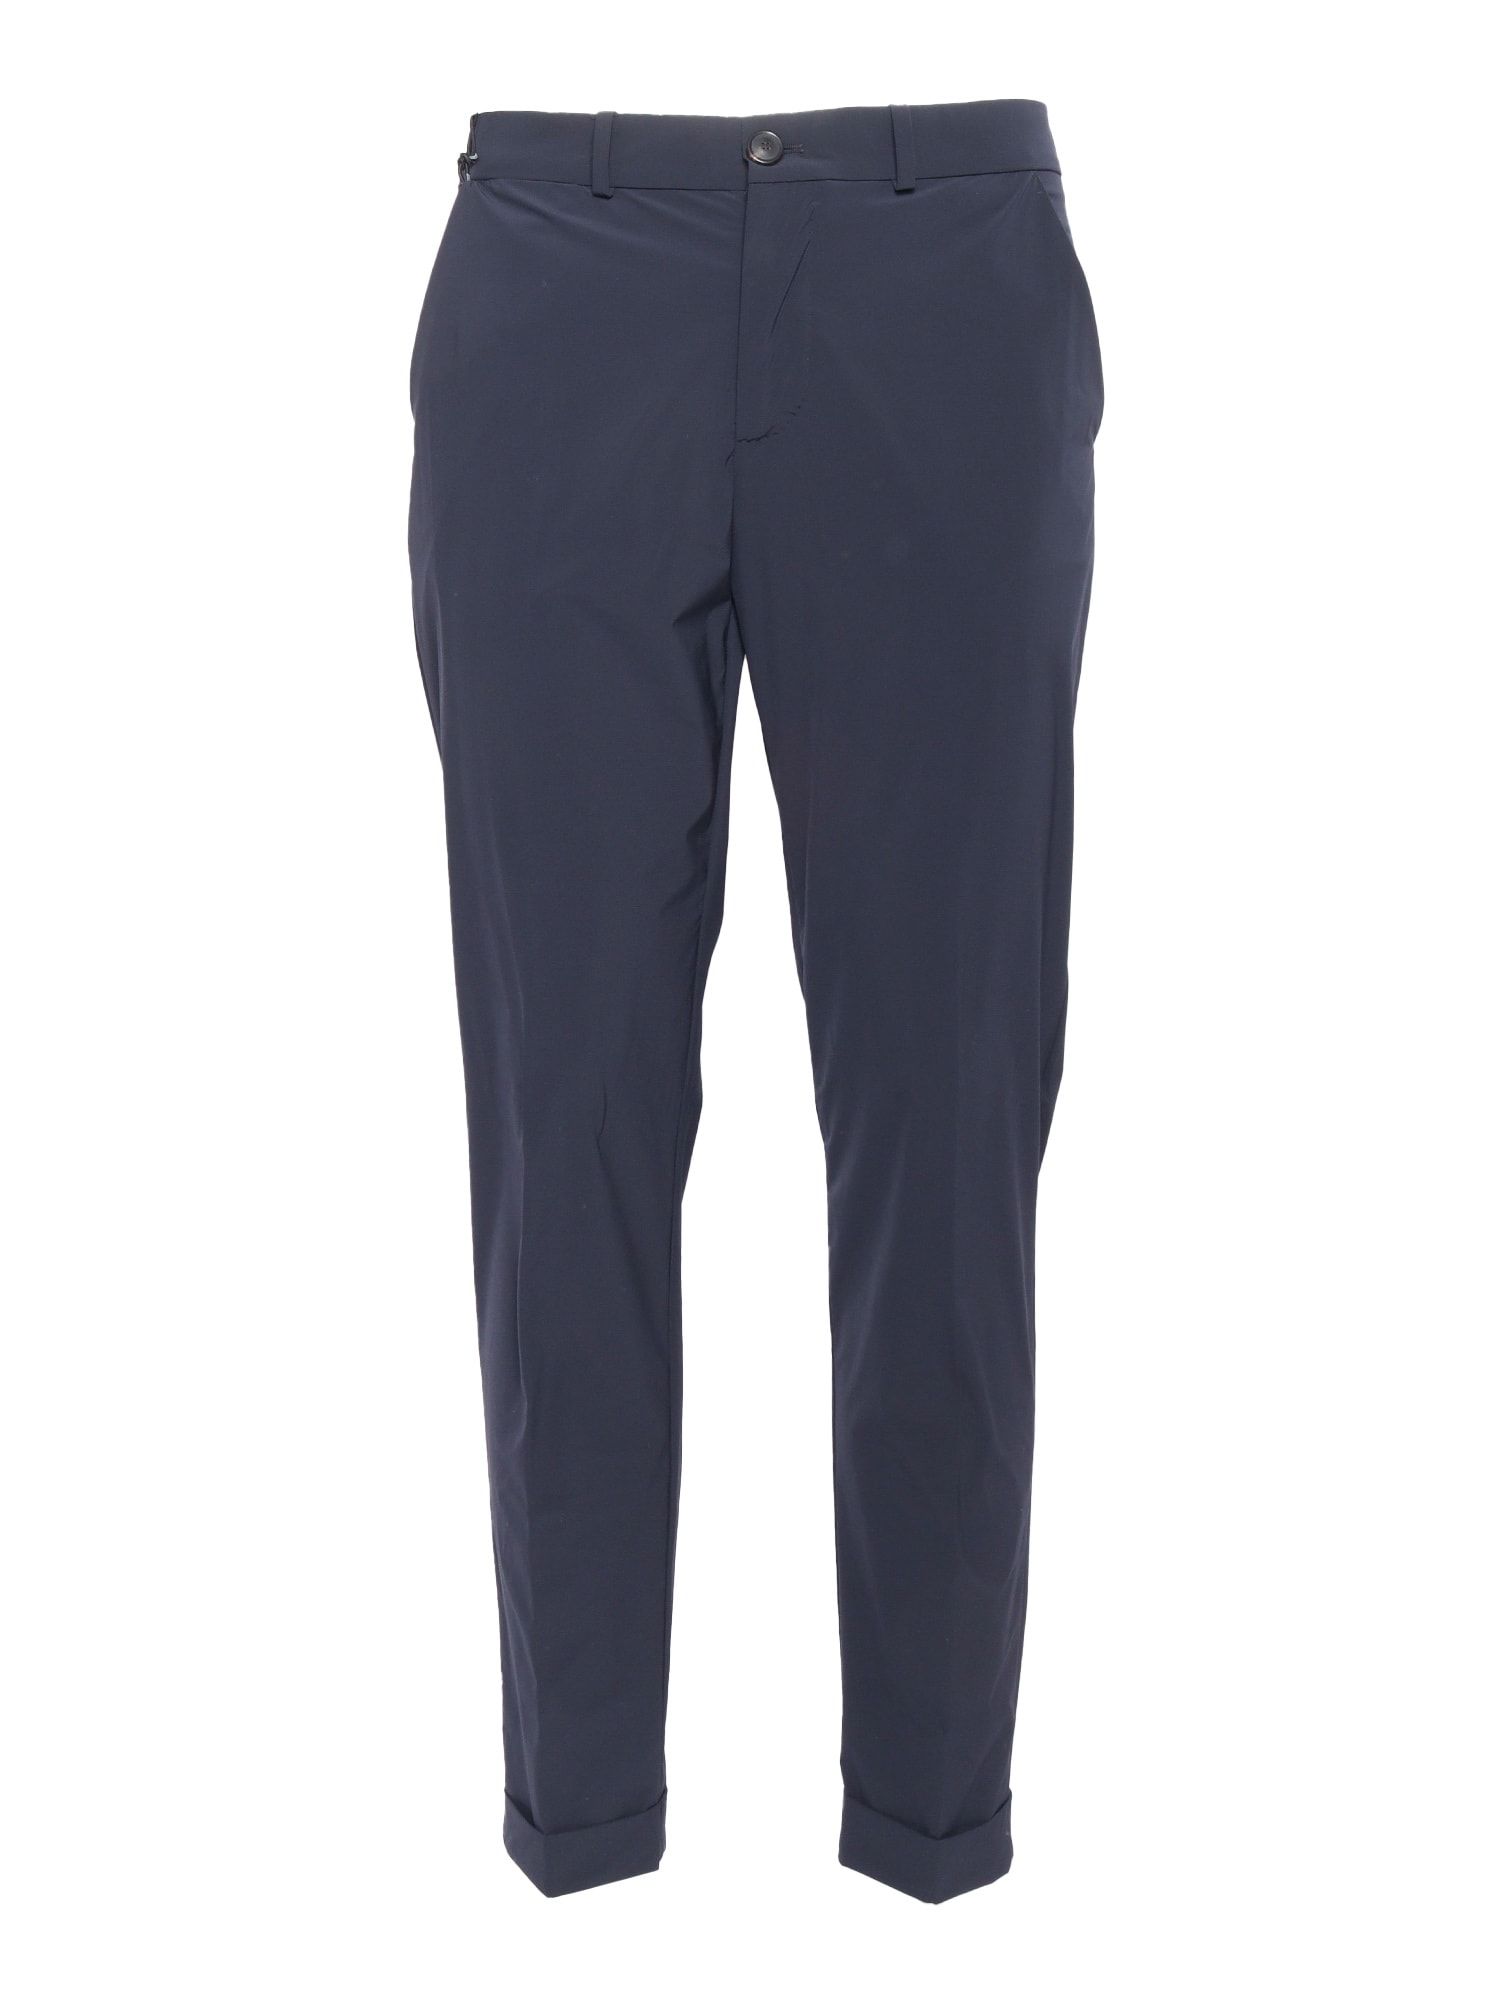 Extralight Blue Chino Trousers